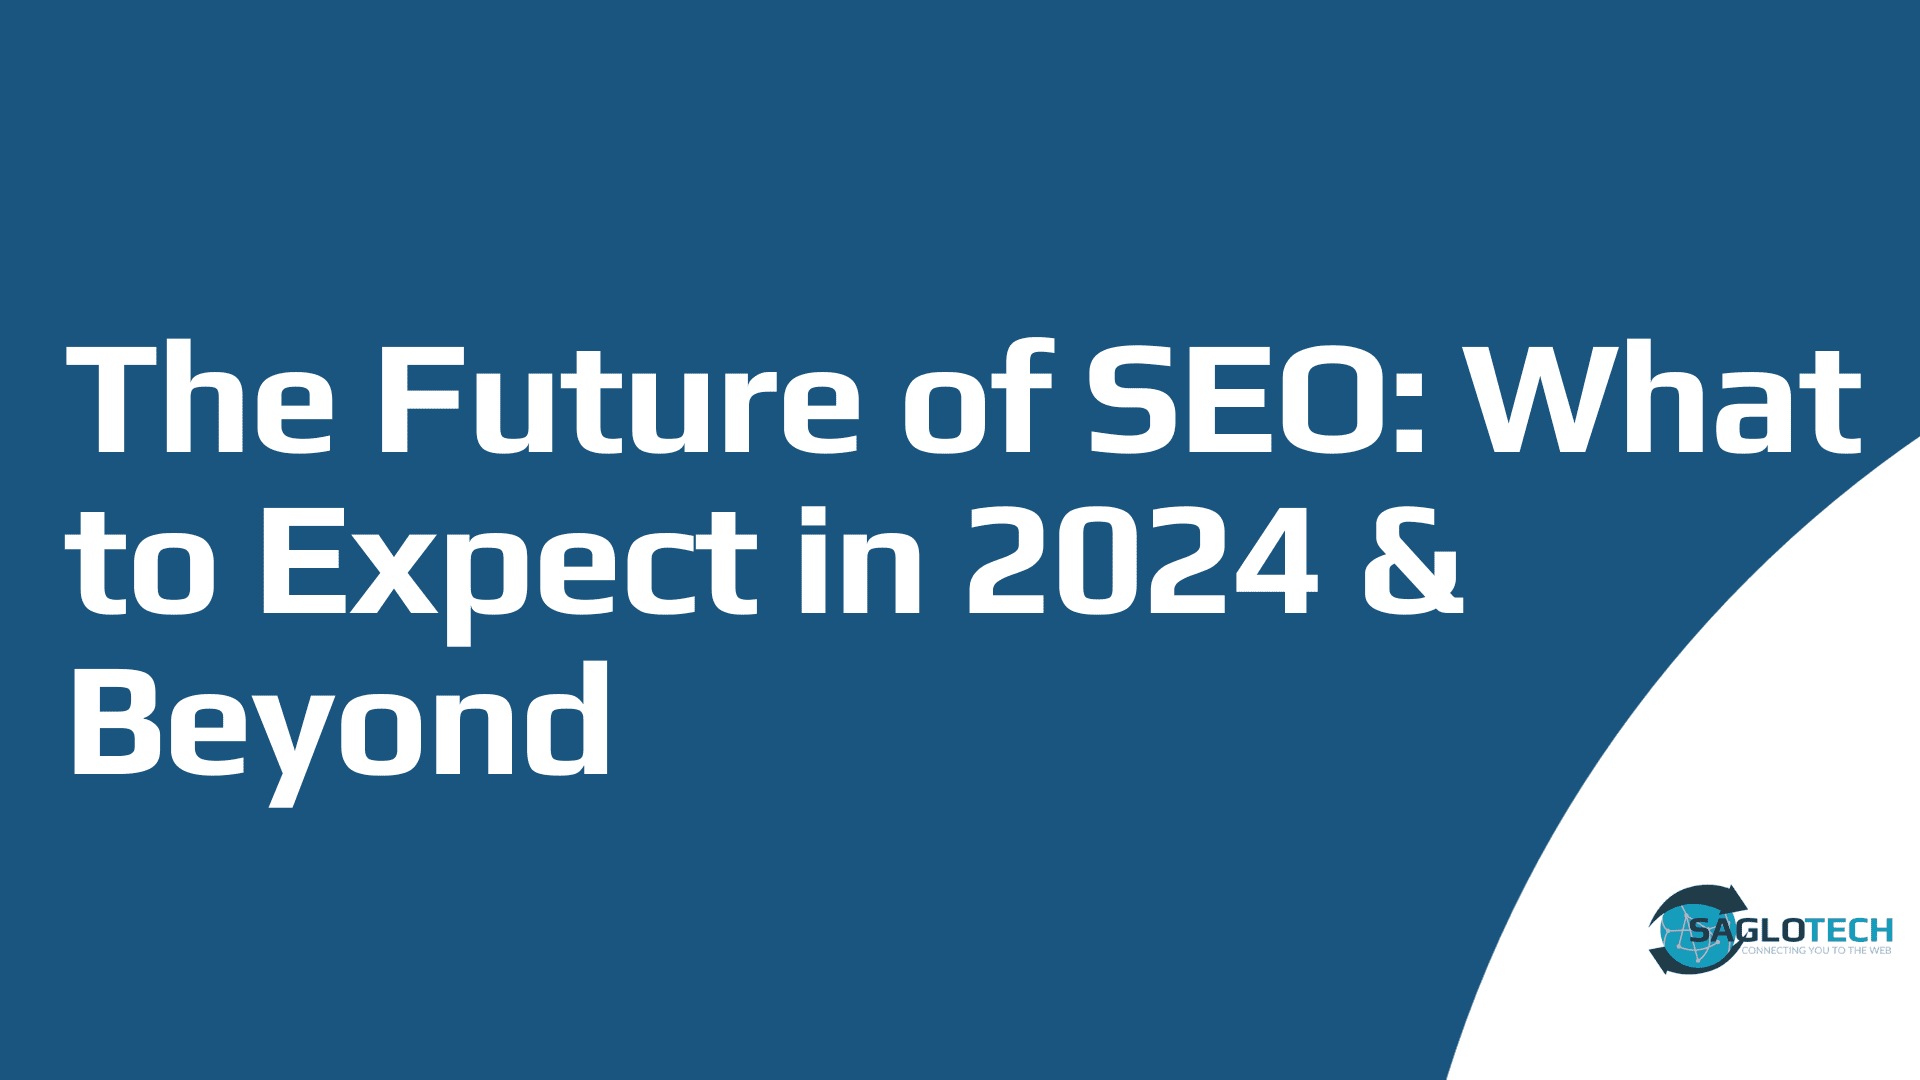 The Future of SEO: What to Expect in the Coming Years